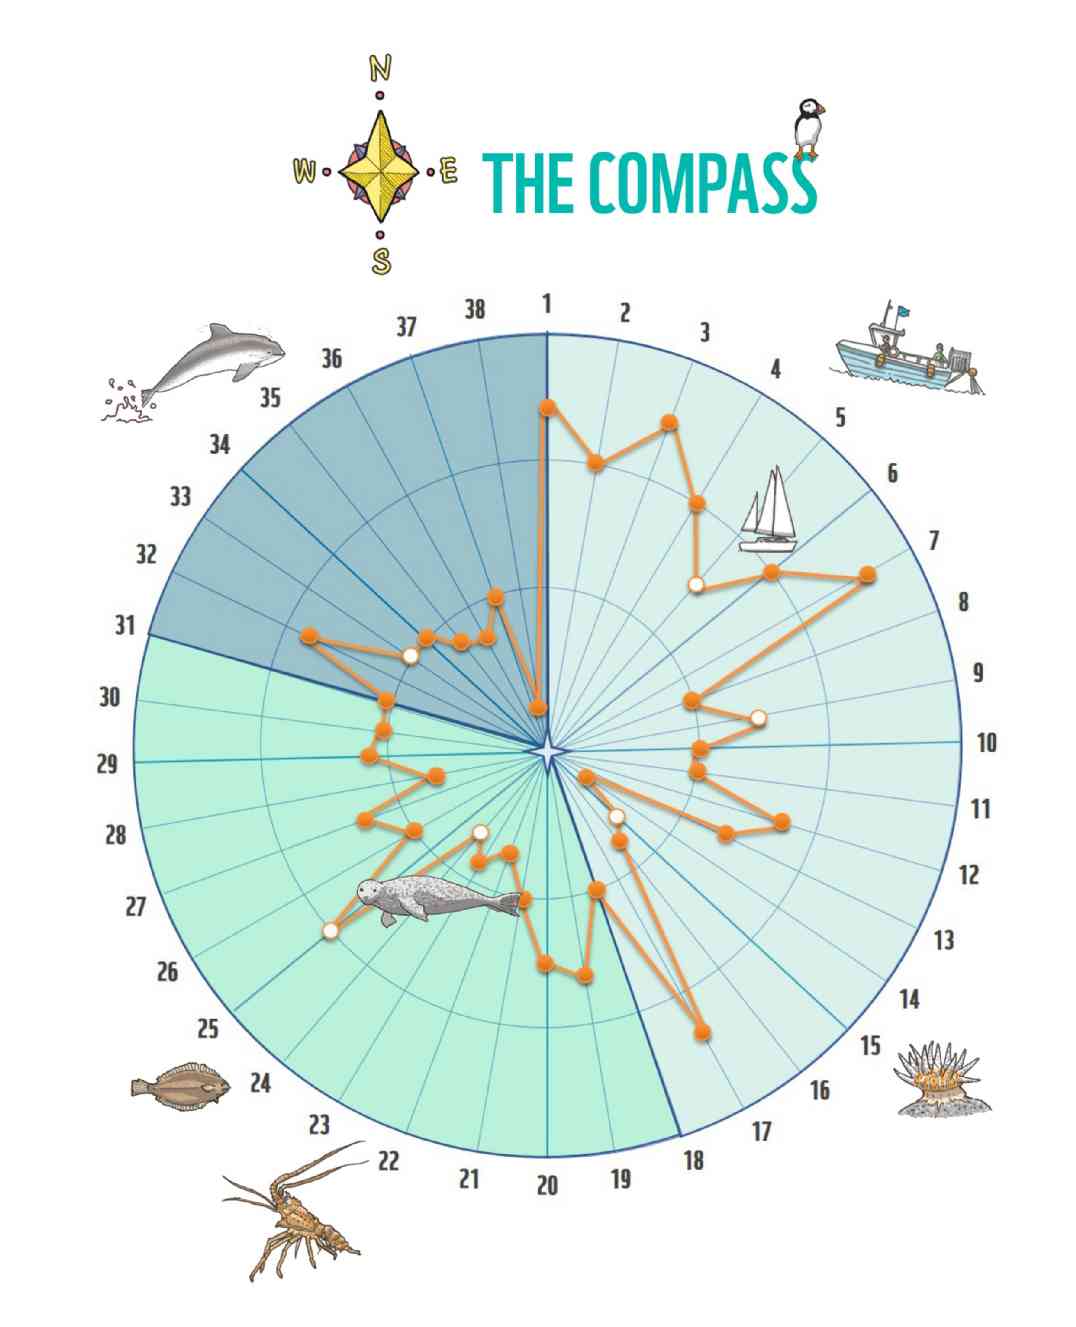 The Compass card diagram